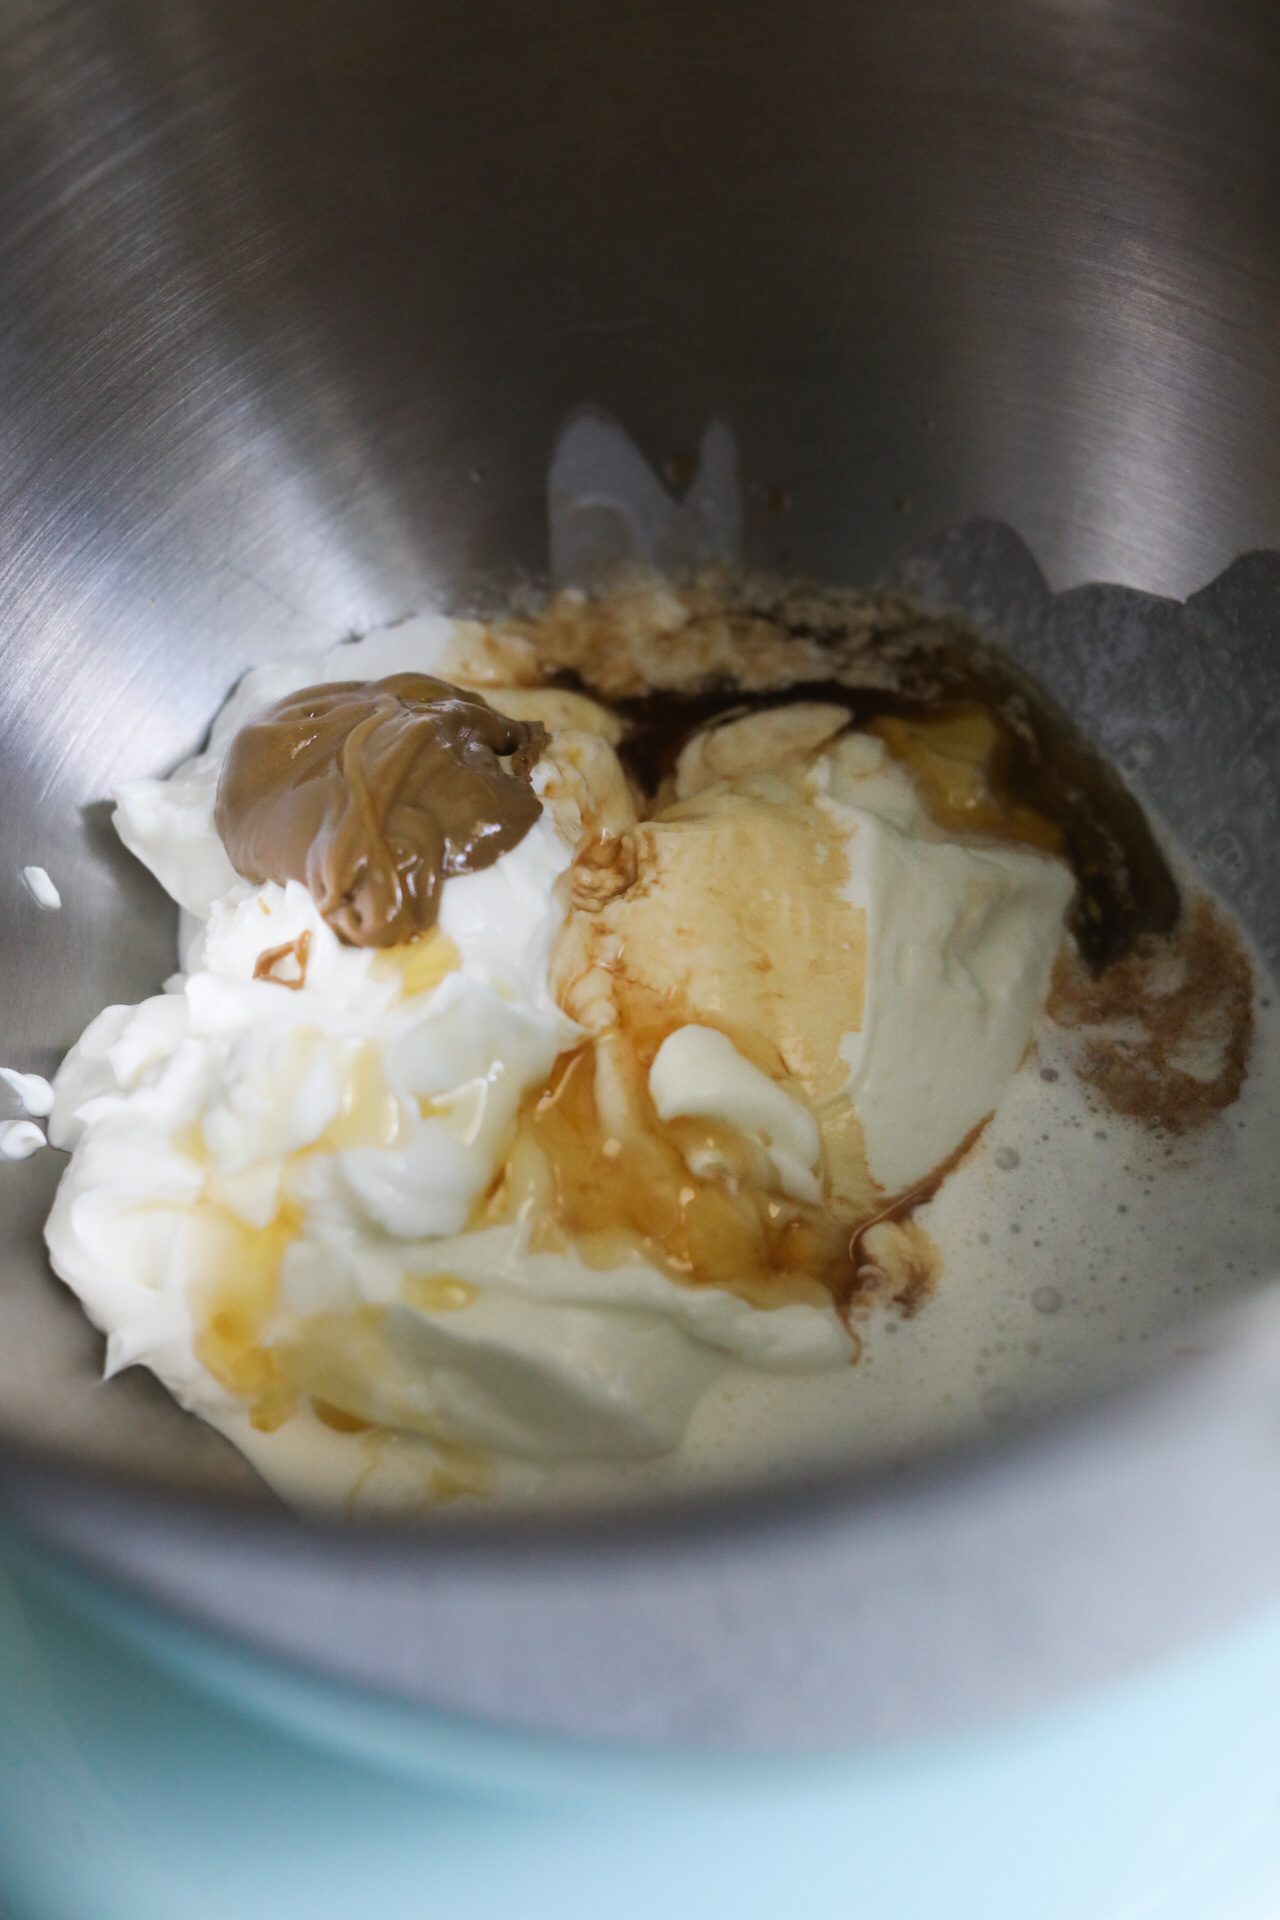 In a metal stand mixer, whipped yogurt ingredients are poured in. Greek yogurt, vanilla extract, honey, sunflower butter and whipping cream. The contents are not mixed.